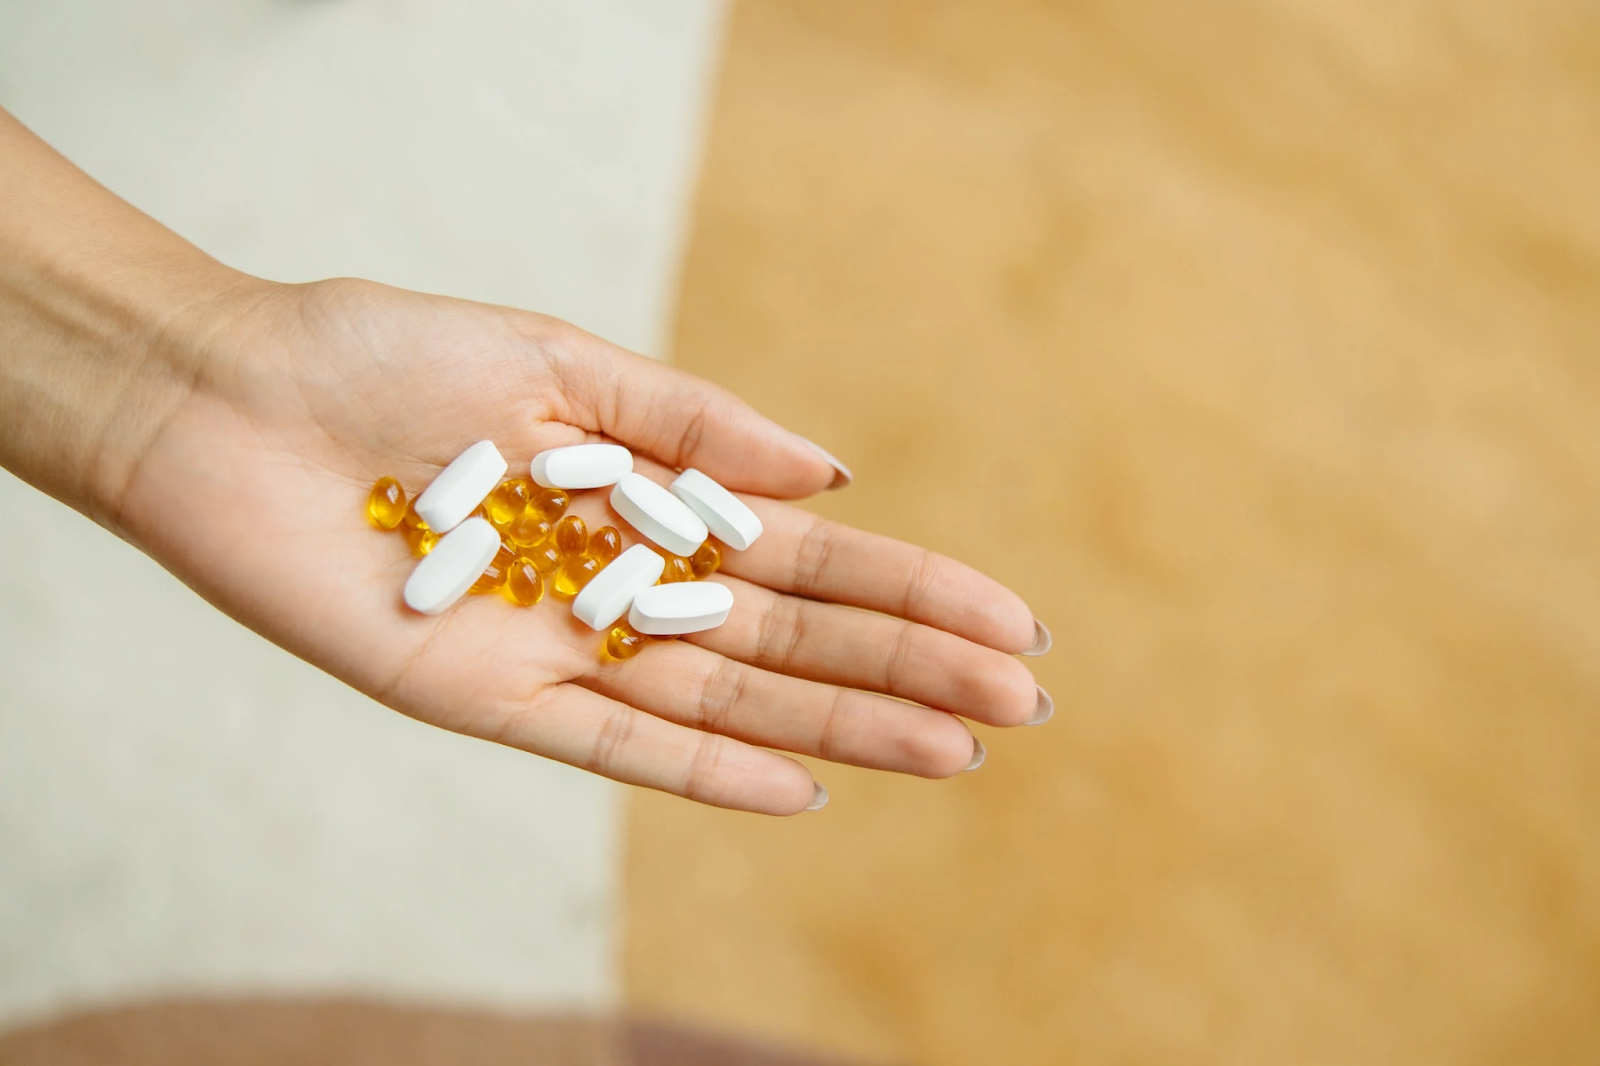 A hand holding vitamin supplements